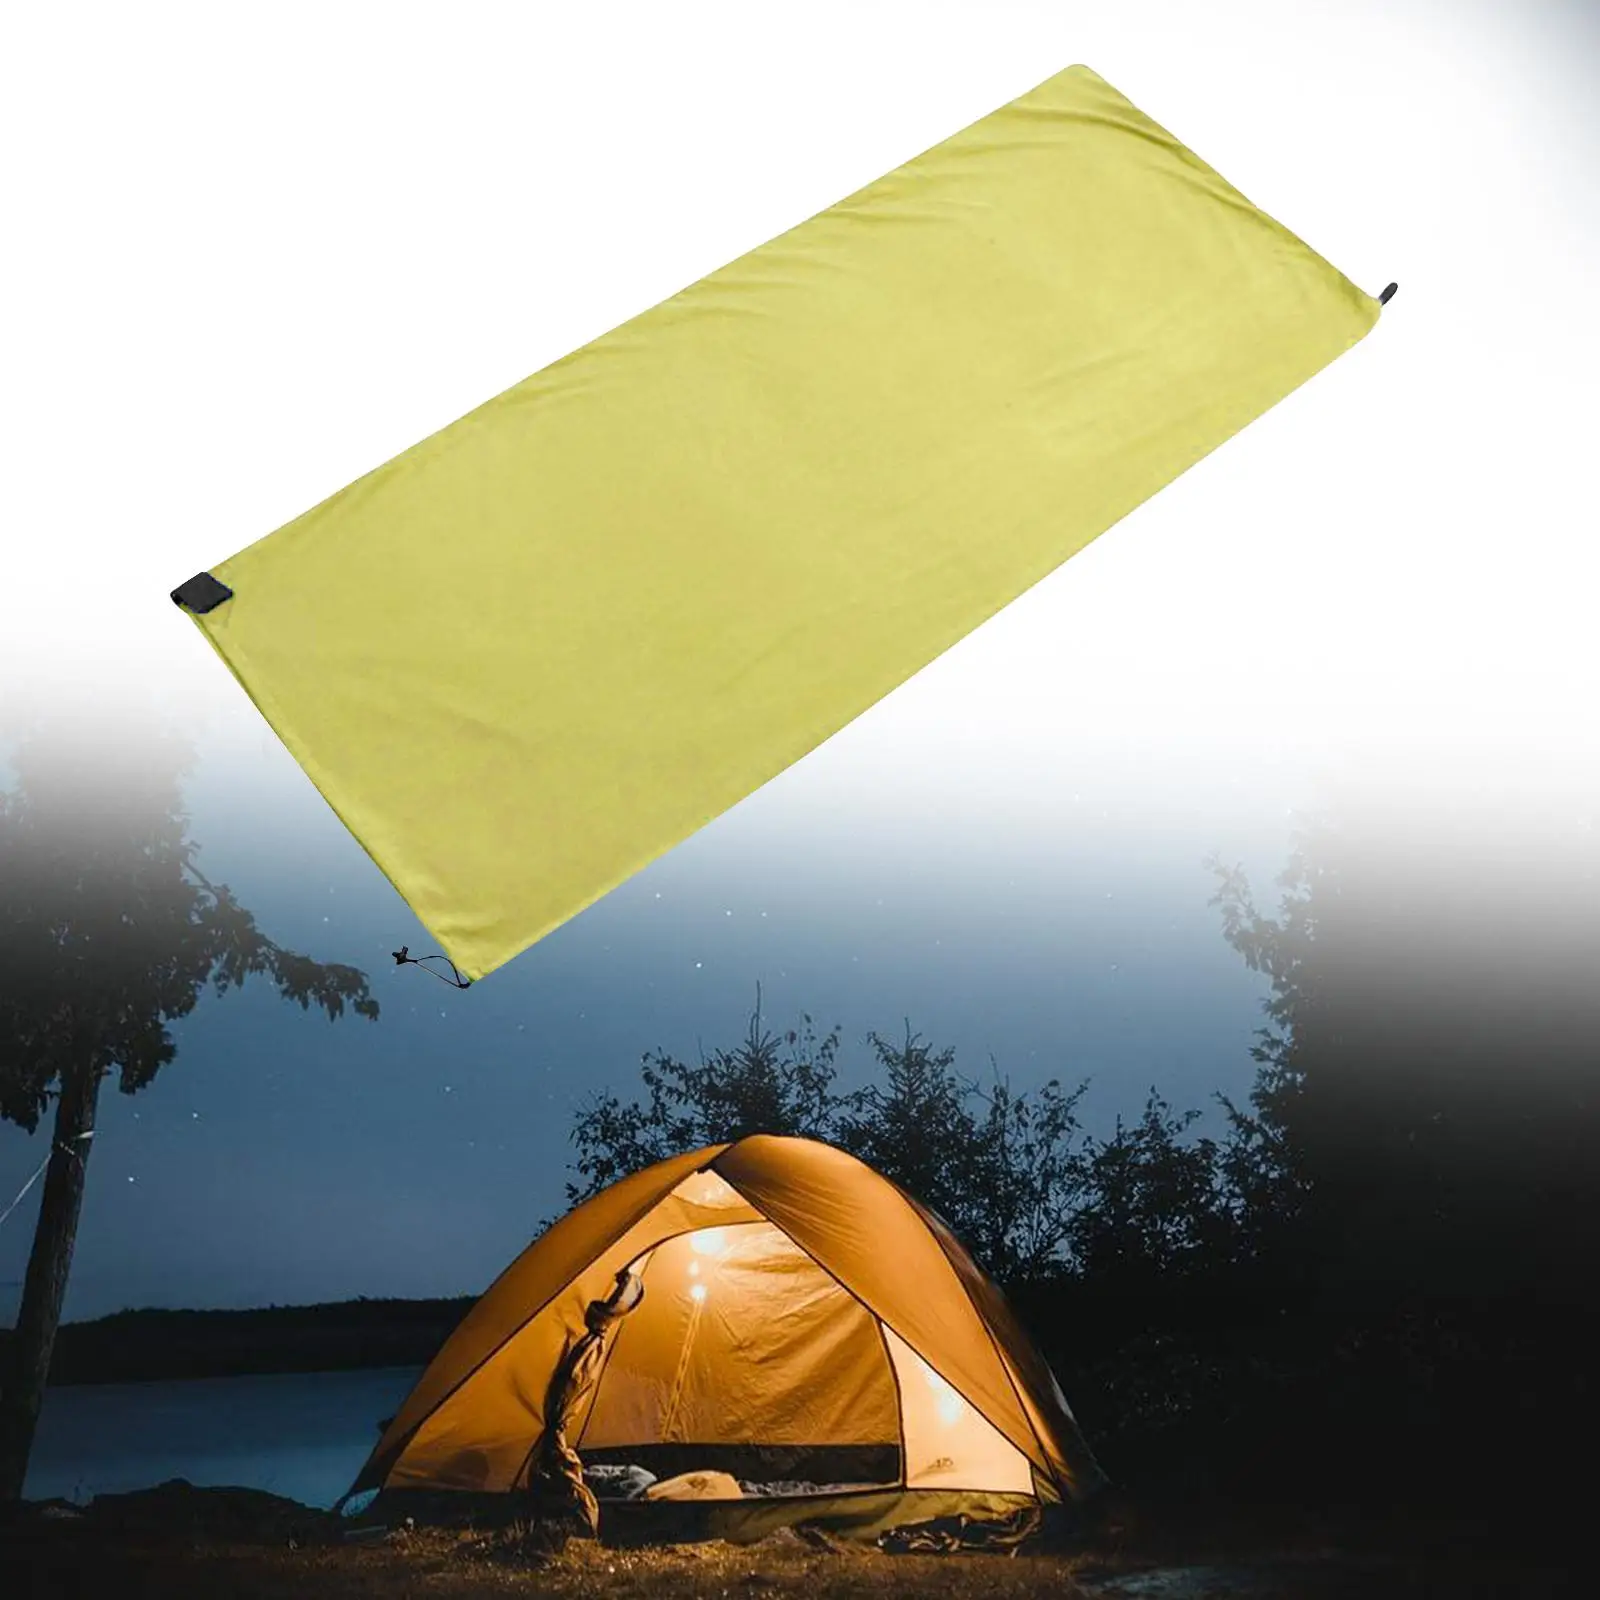 Sleeping Bag Liner Sleep Sheet Backpacking Blanket Versatile for Warm or Cold Weather Accessory Full Sized Zipper 180cm Length